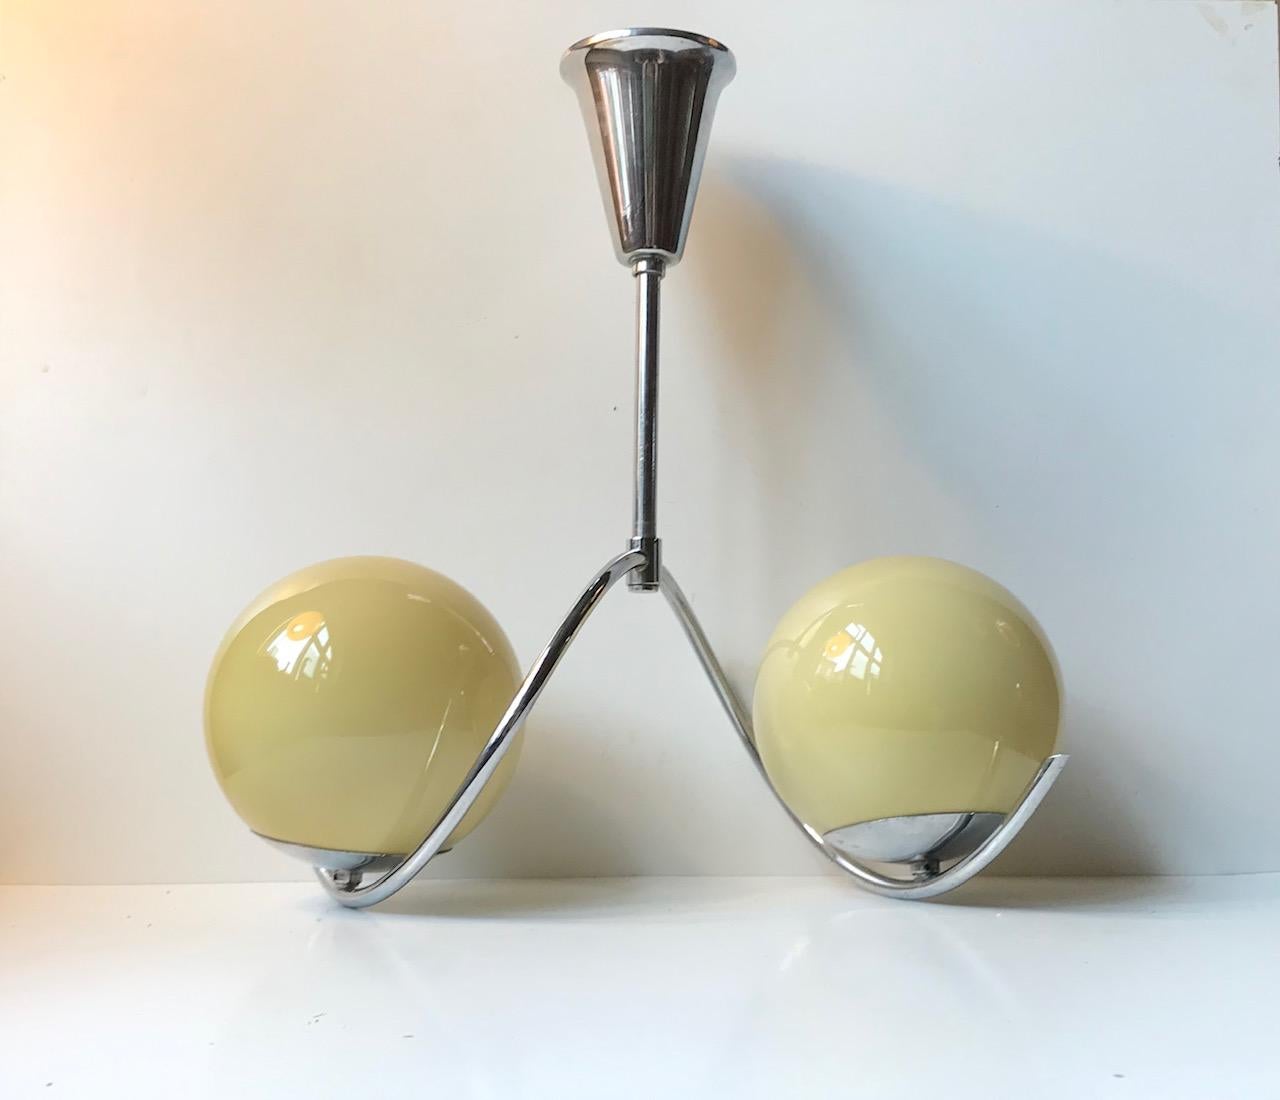 Sculptural Bauhaus chandelier executed in chrome nickel-plated brass. It features its original shades in yellow opaline glass and its original canopy. Manufactured and designed by Ernest Voss in Denmark during the 1930s in a style reminiscent of